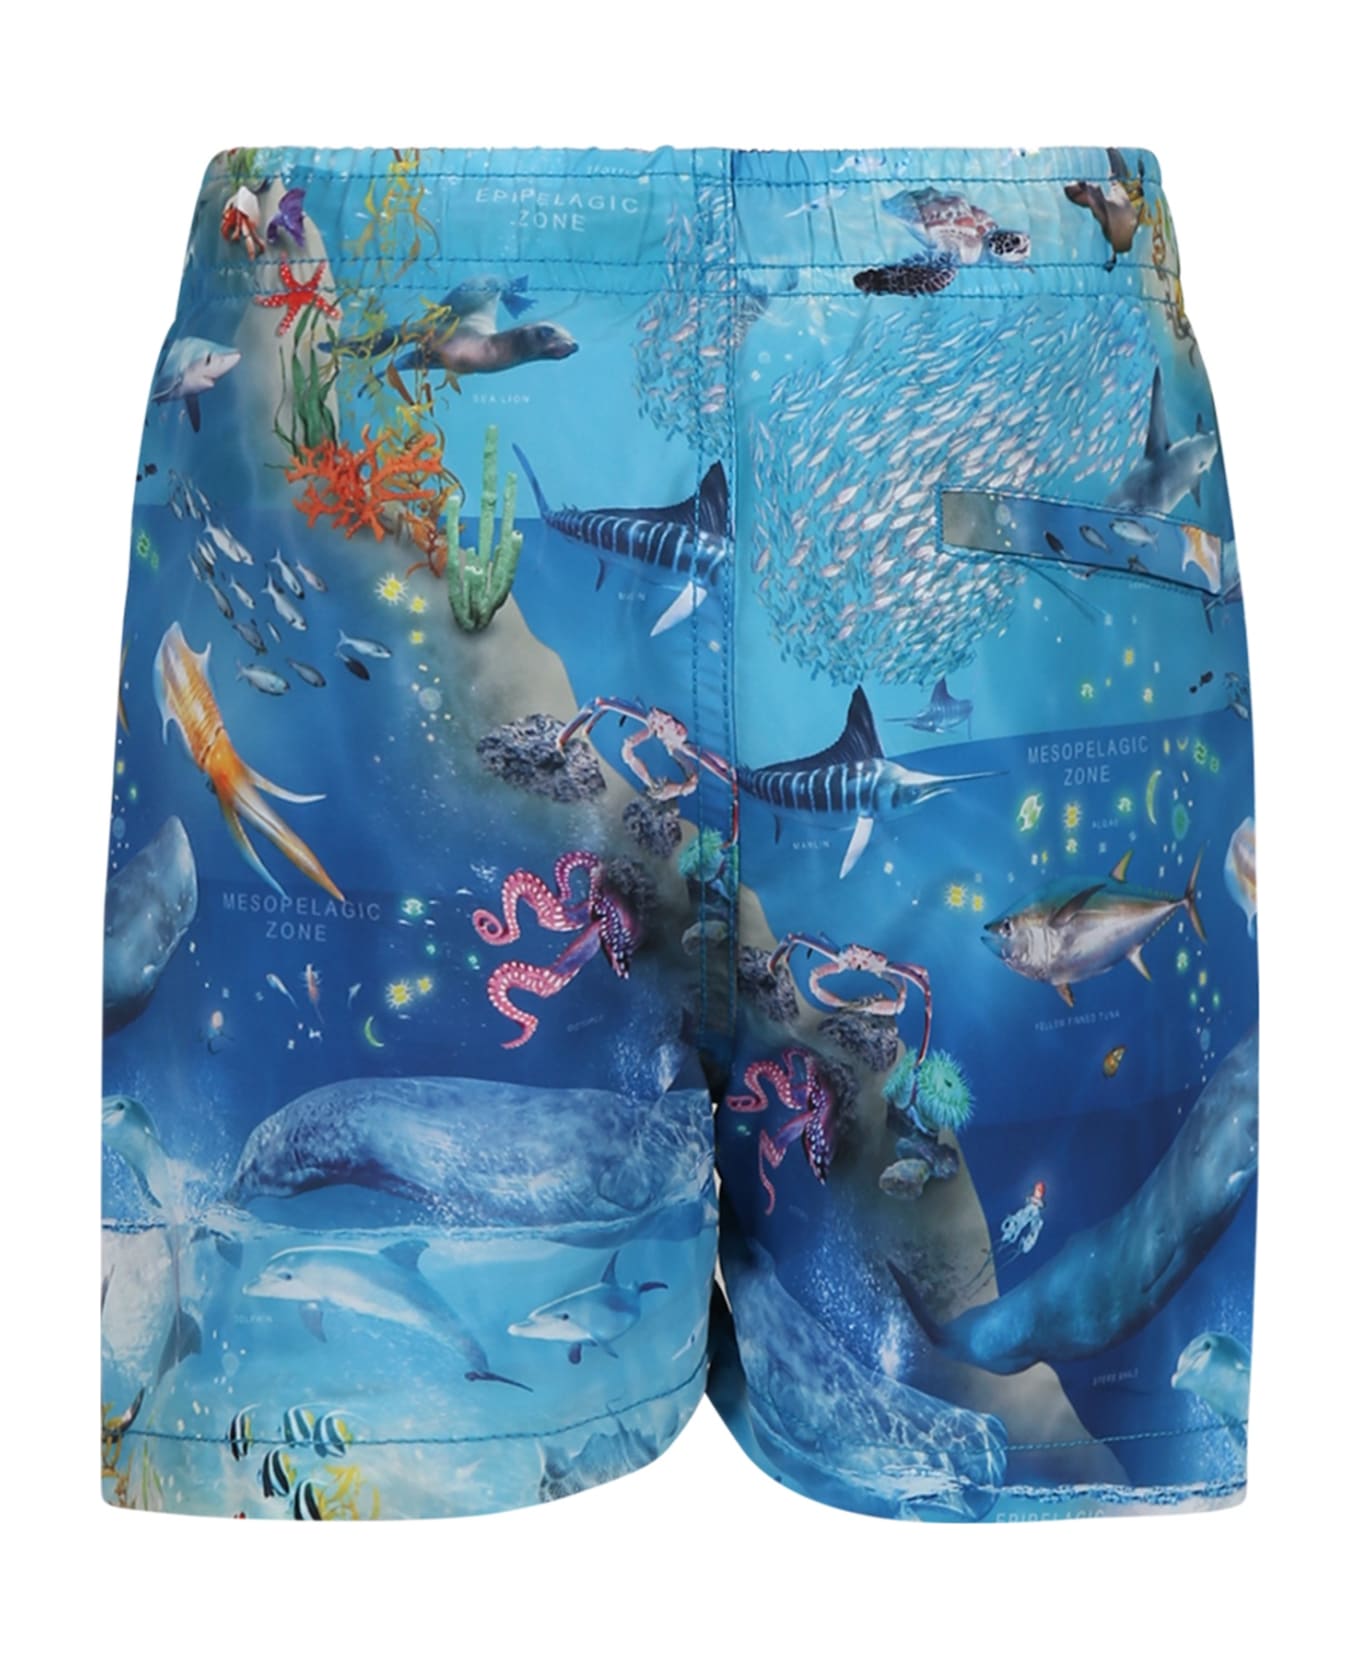 Molo Light Blue Swimsuit For Boy With Marine Animals - Light Blue